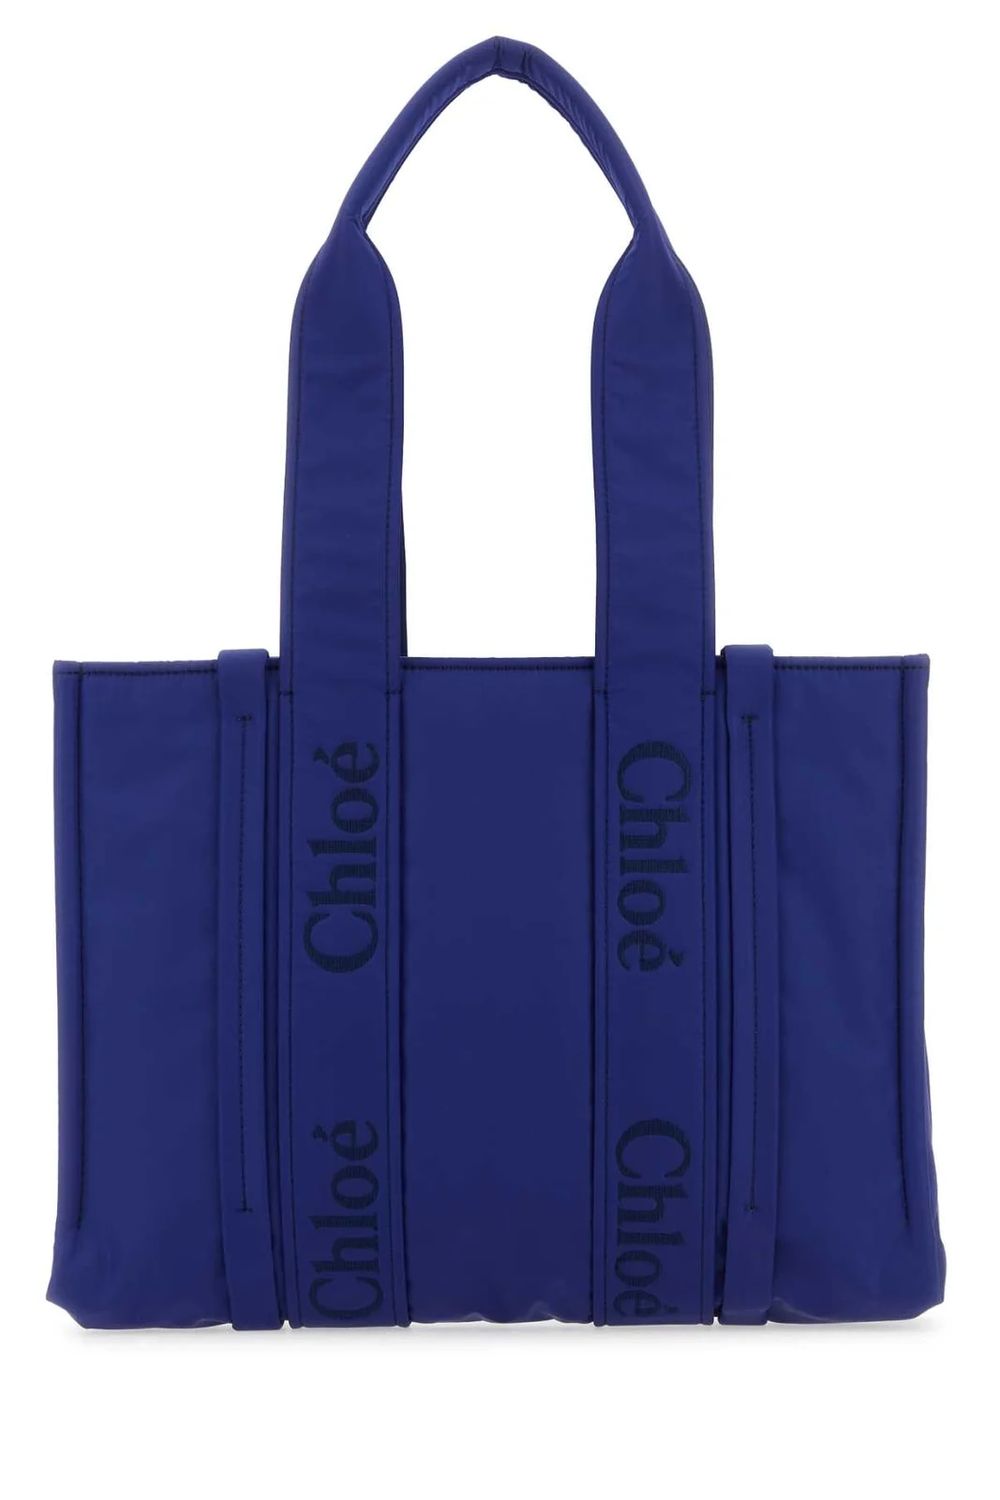 CHLOÉ Navy Blue Woody Medium Tote for Women with 100% Polyester